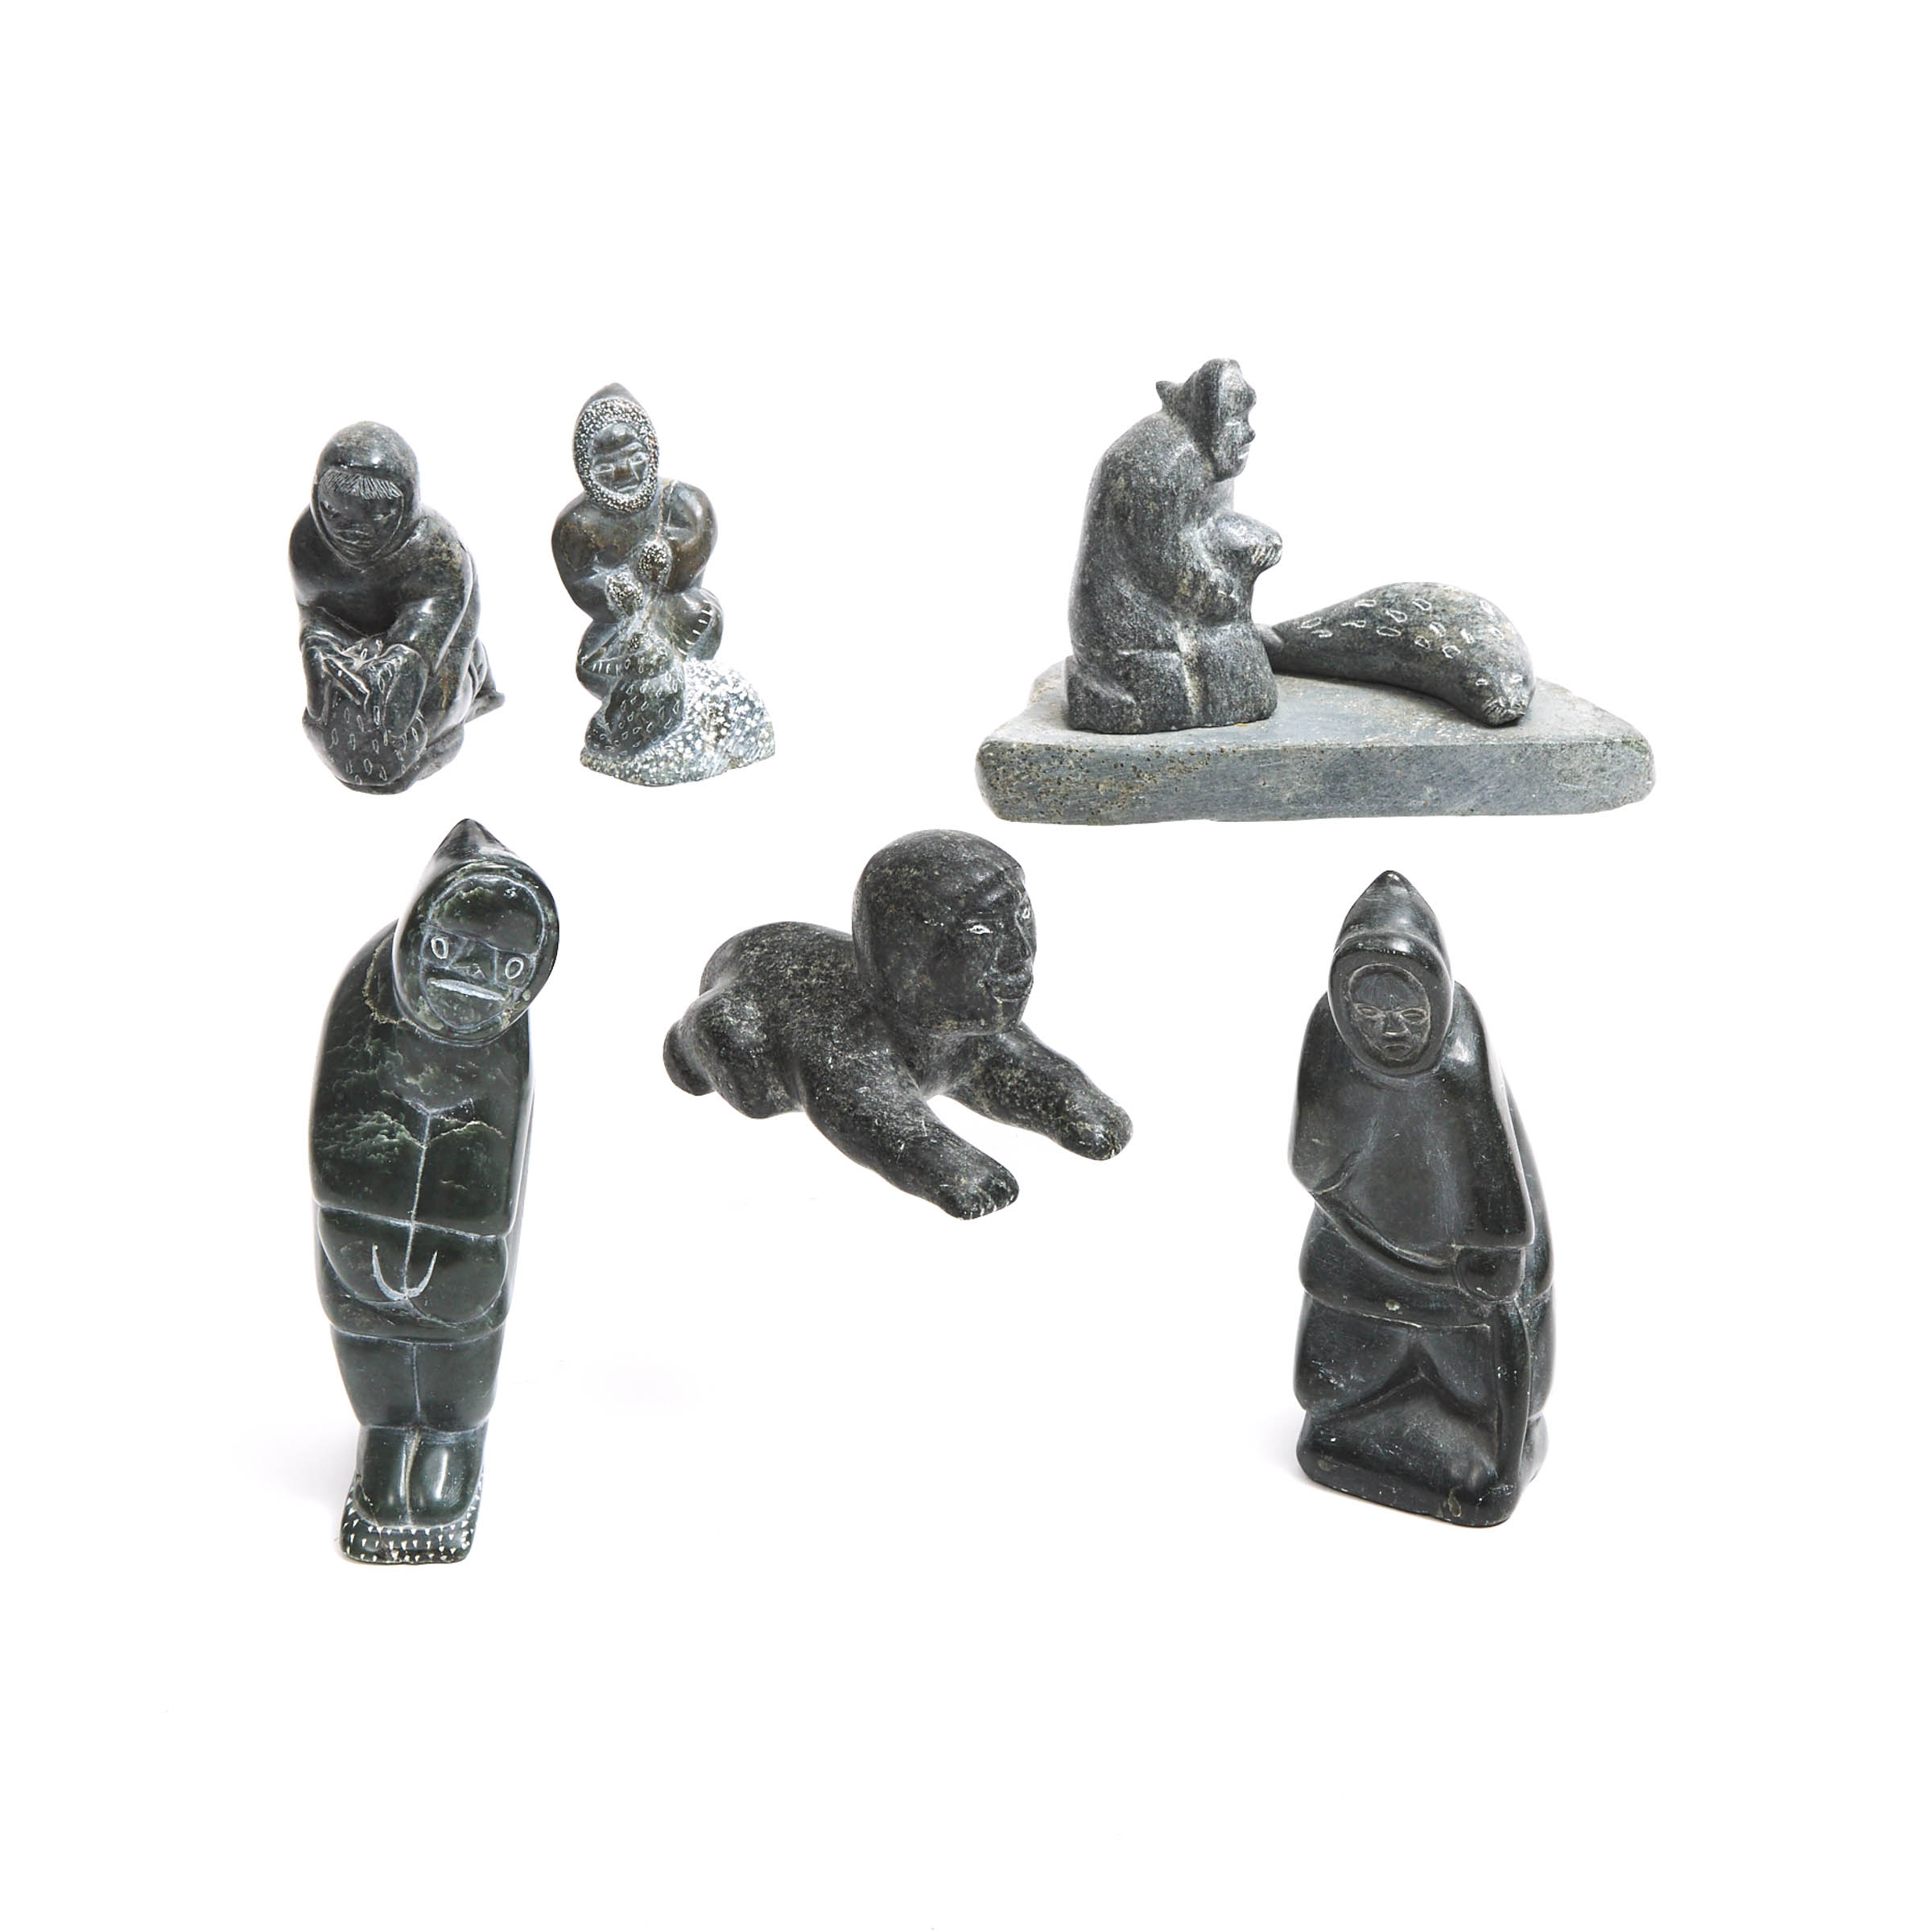 A COLLECTION OF SIX INUIT CARVINGS OF HUNTING SCENES